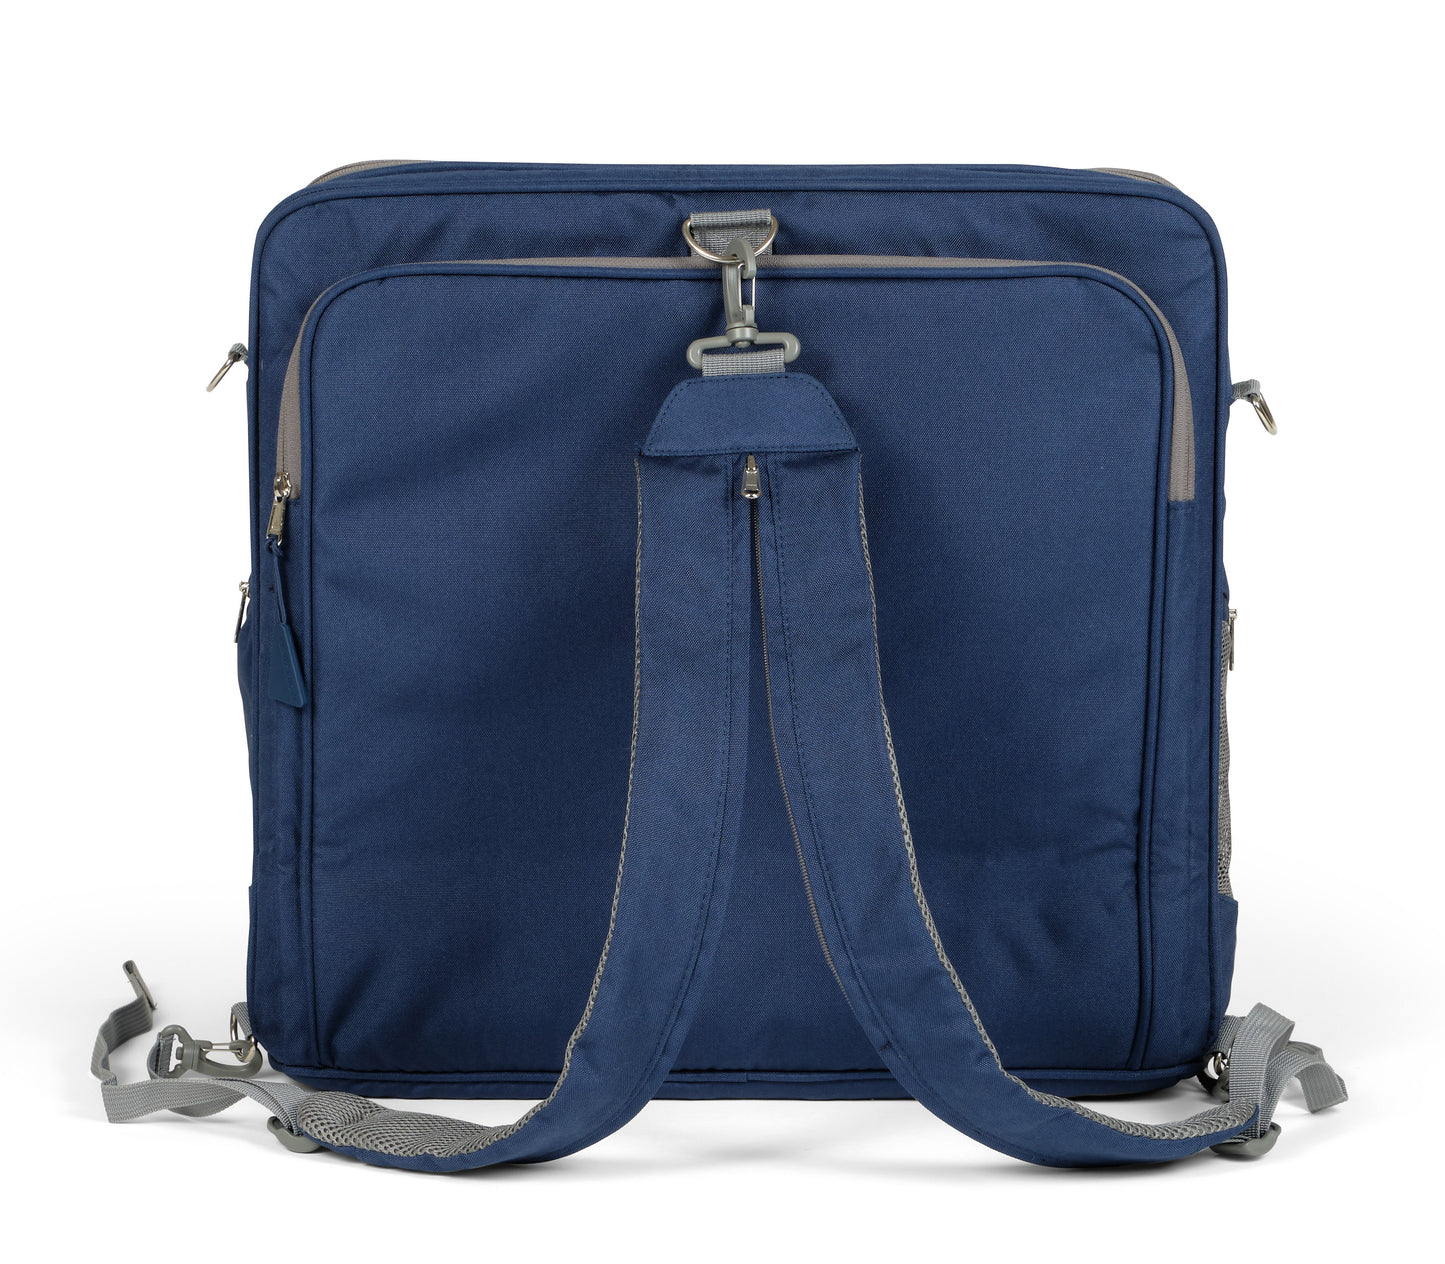 Back view of Marina-colored Playamigo showing backpack strap configuration